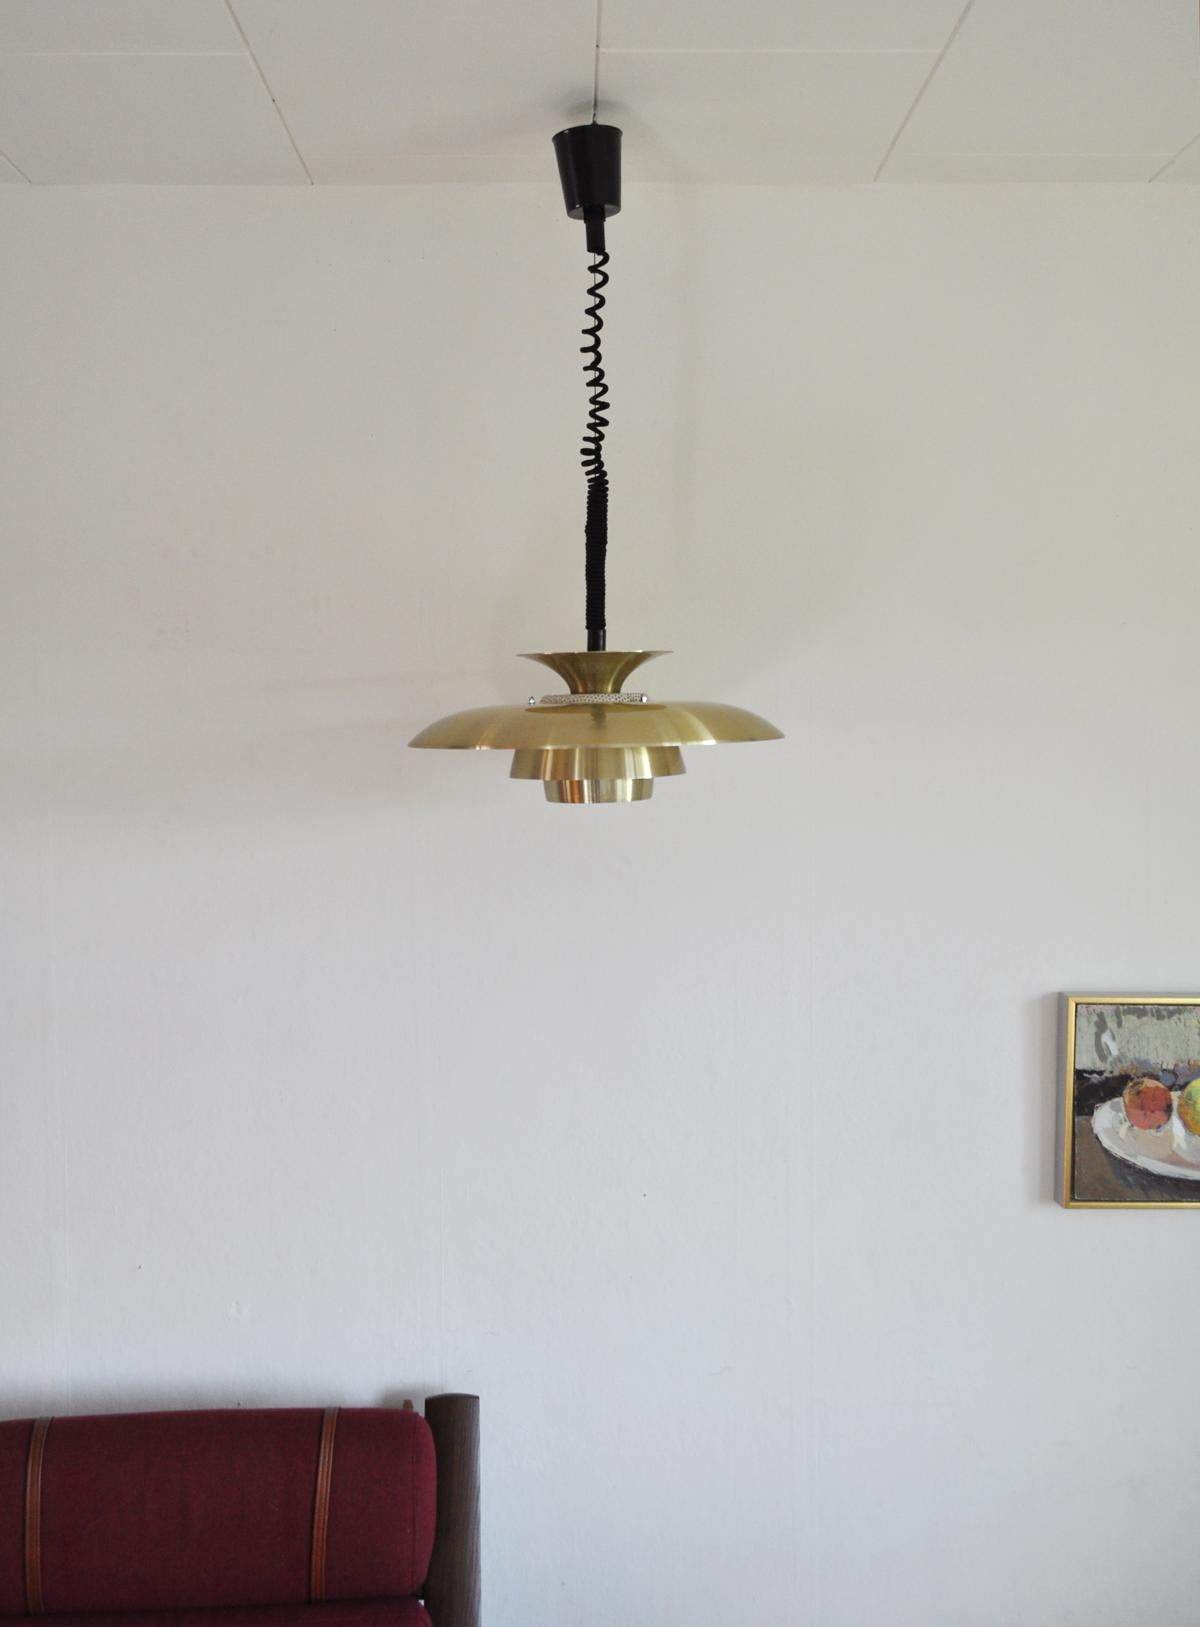 A classic Danish multi-layered pendant light in brass with a white enamelled inner surface. Manufactured by Jeka. In the style of the iconic PH5 by Poul Henningsen.
Diameter 45 cm, height 18.5 cm.
Very fine condition with few signs of wear.